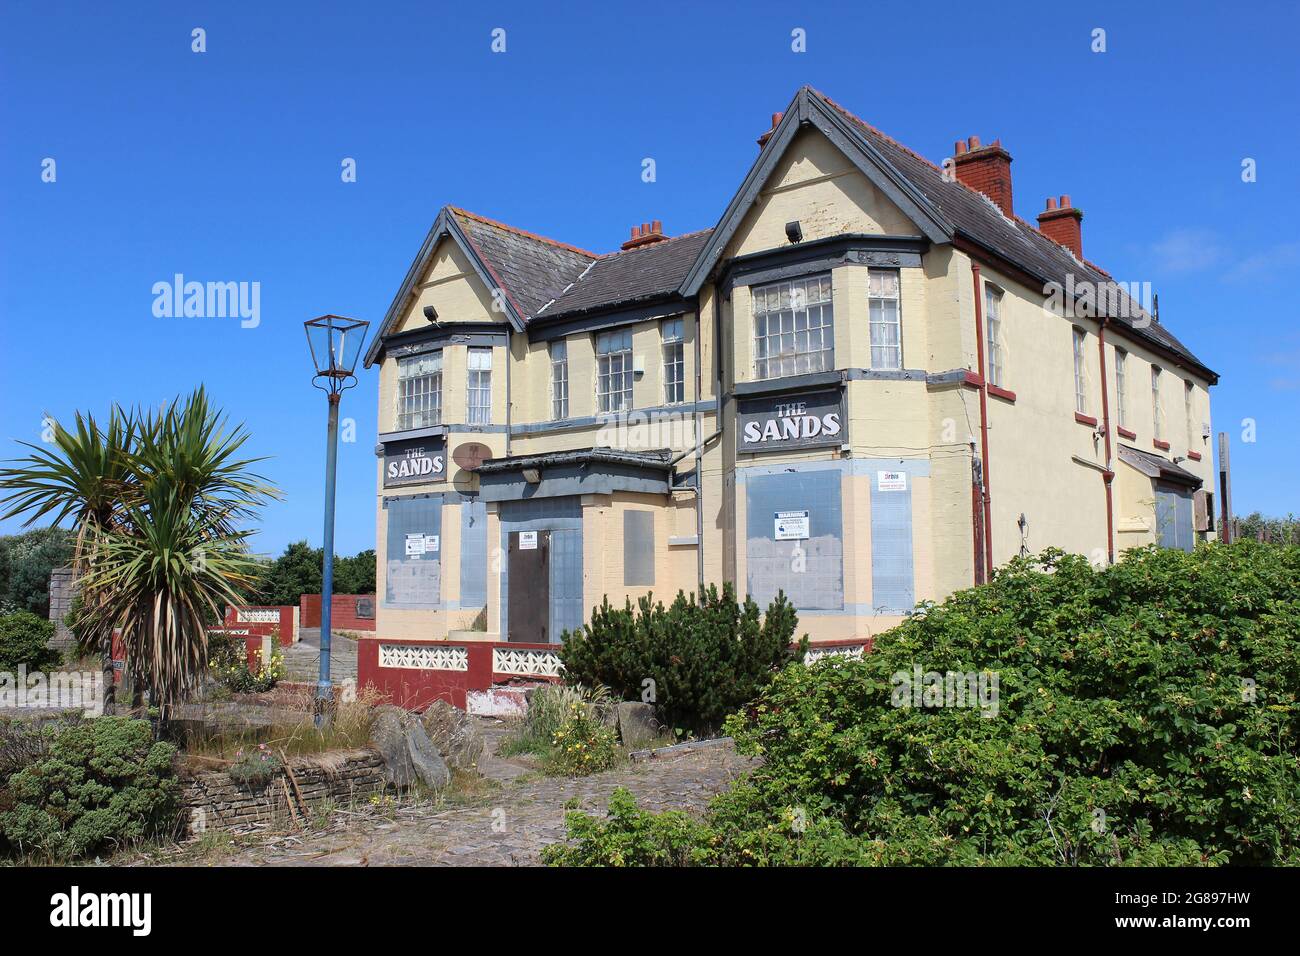 The Sands - derelict Pub beside Sands Lake, Ainsdale, Merseyside Stock Photo